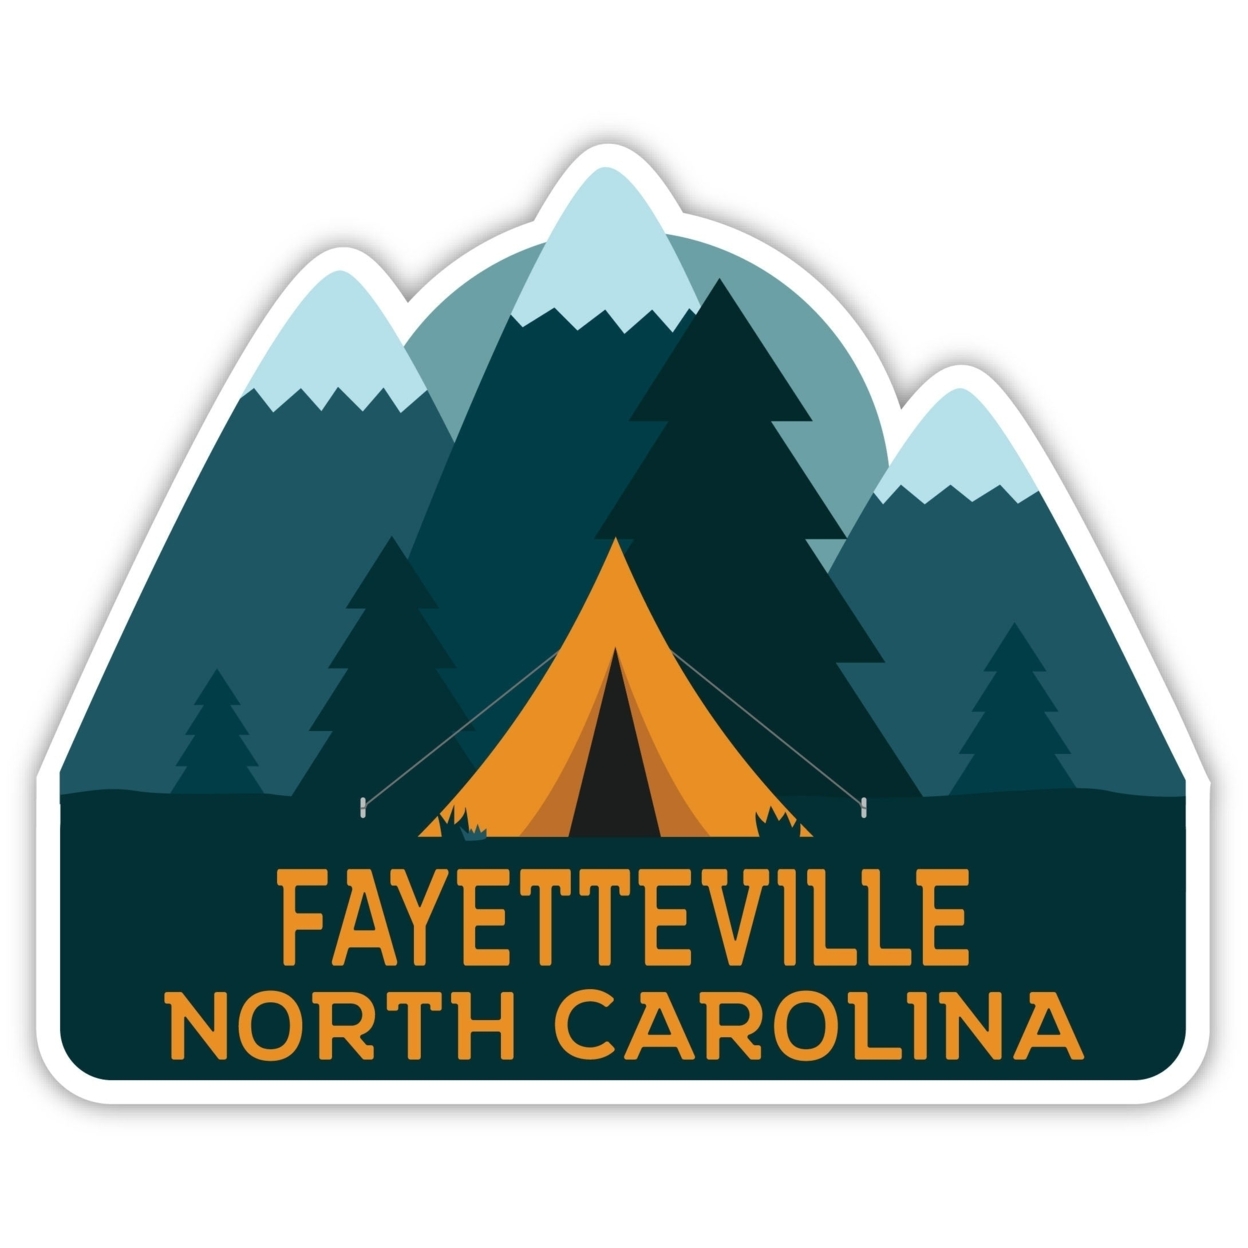 Fayetteville North Carolina Souvenir Decorative Stickers (Choose Theme And Size) - 4-Pack, 12-Inch, Tent